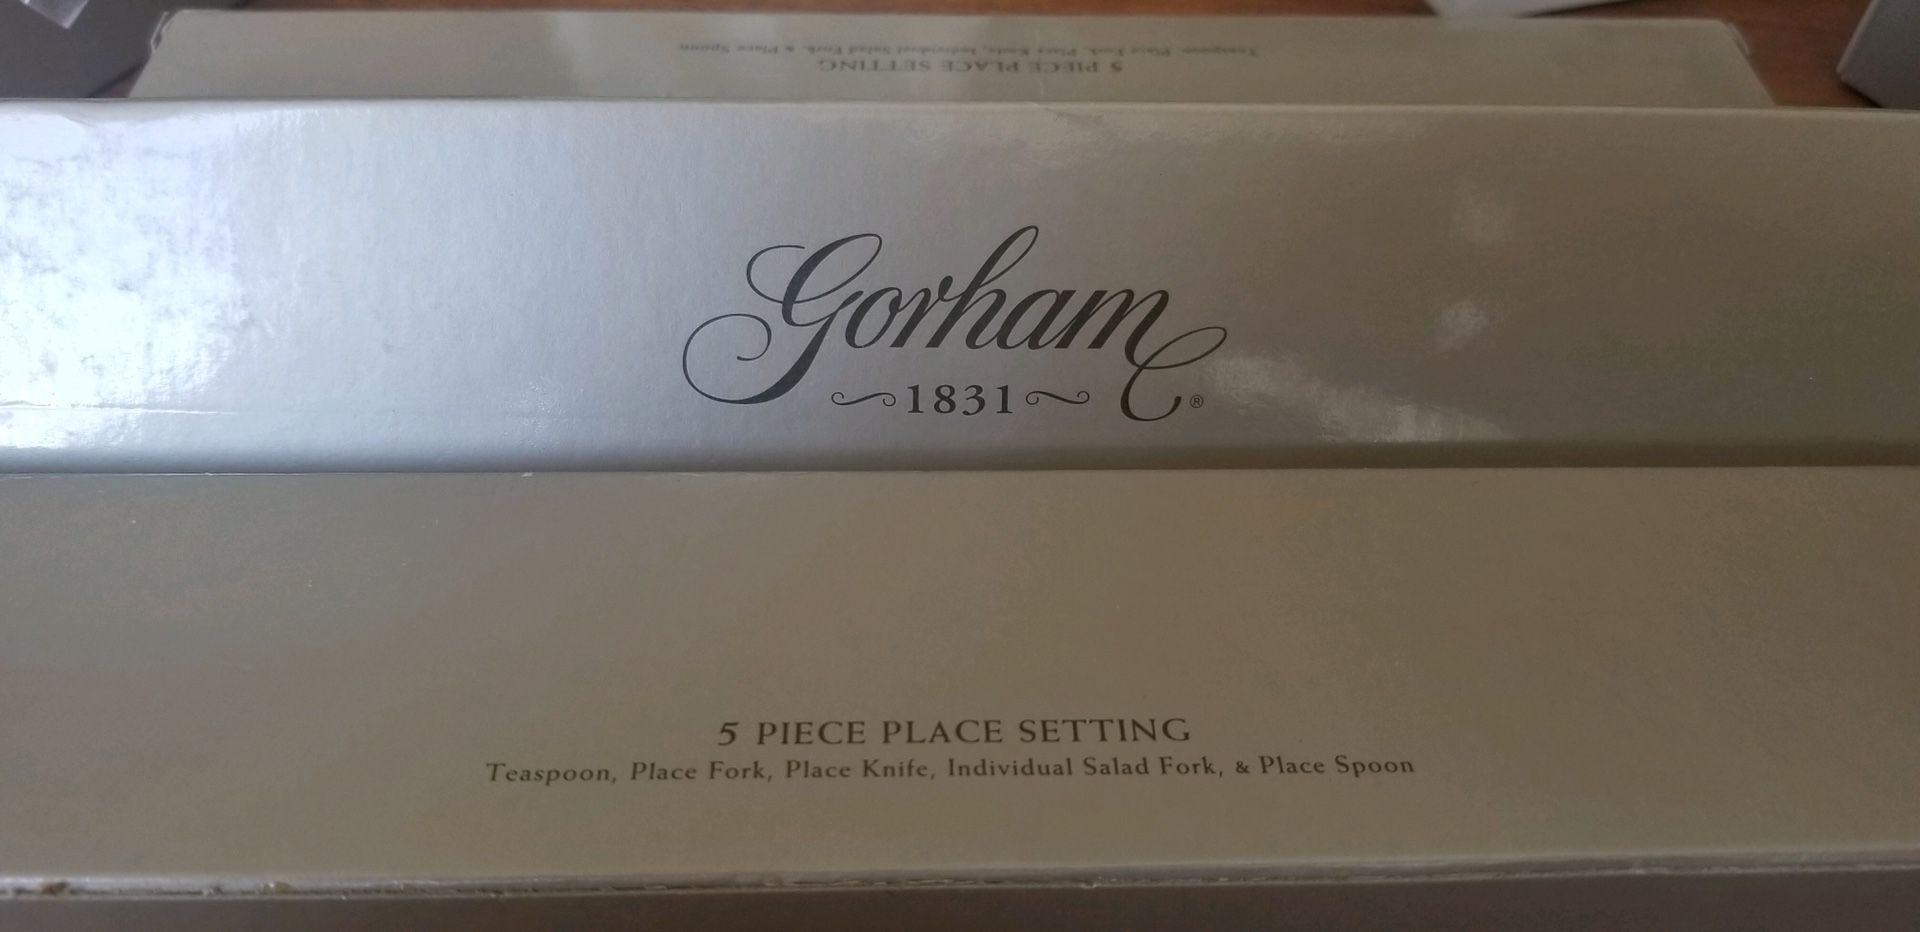 Gotham stainless steal flatware - NEW